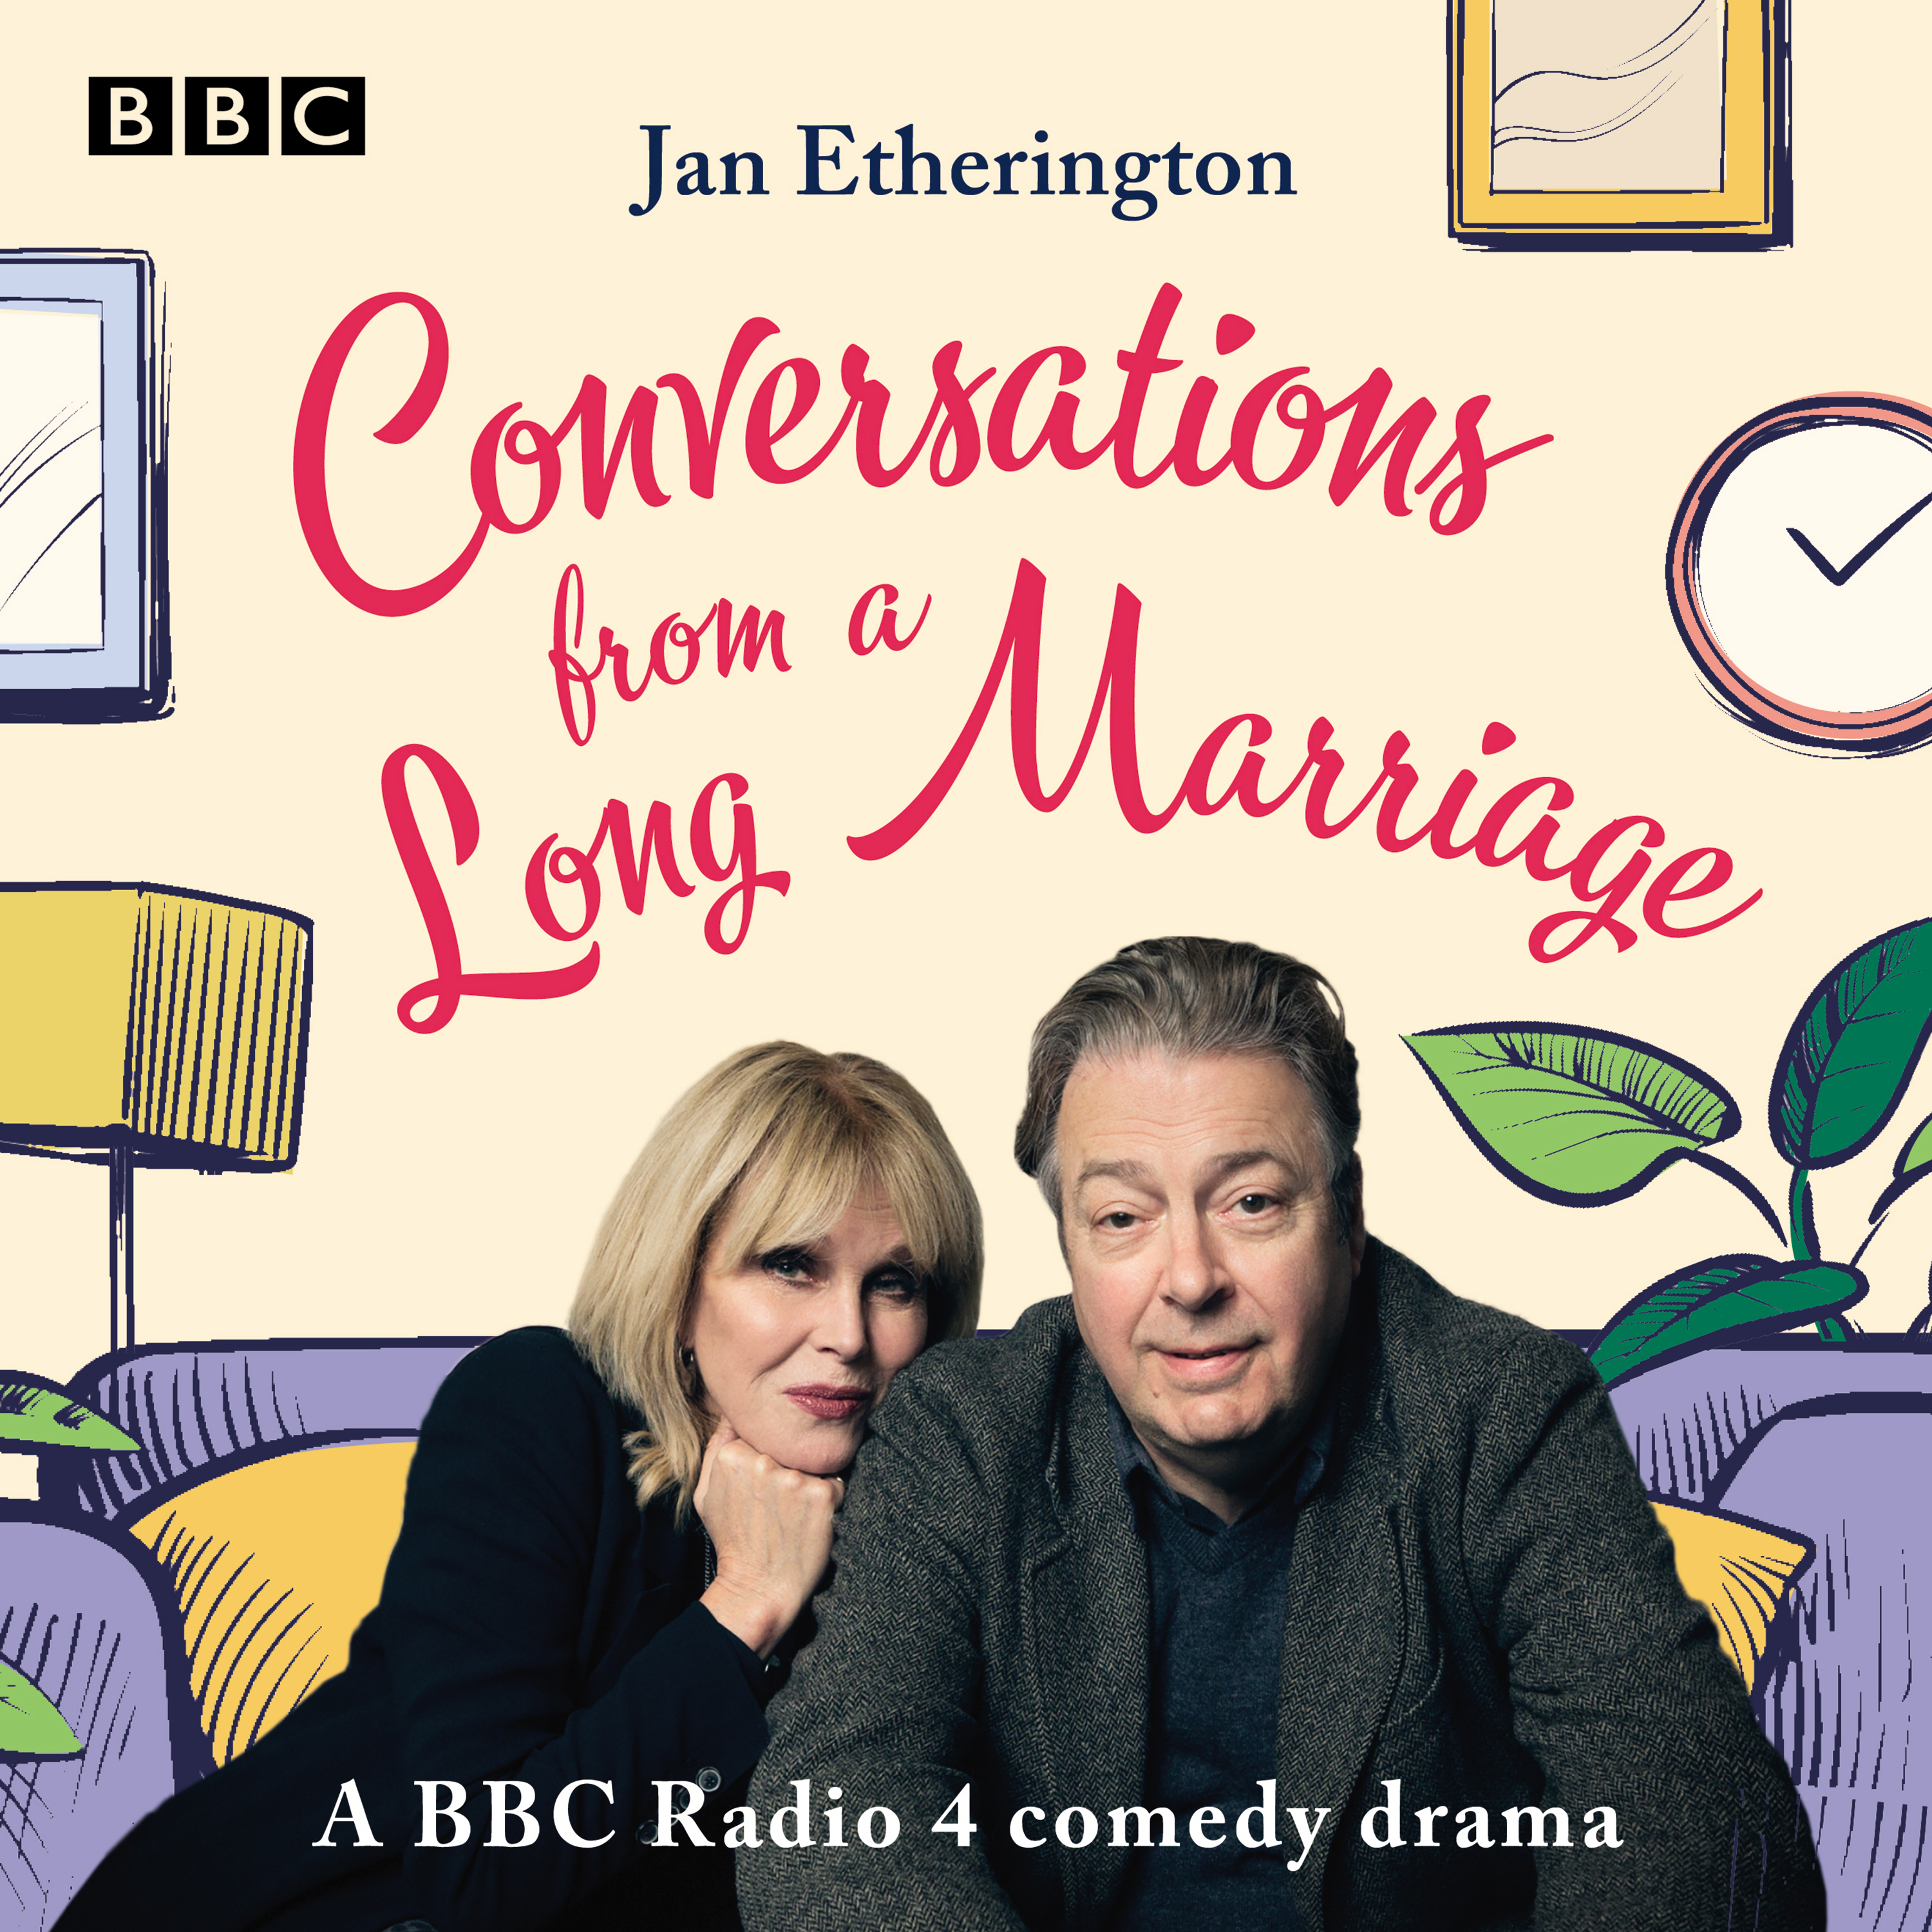 Audiobook cover for "Conversations from a Long Marriage":Joanna Lumley and Roger Allam in the centre, with an illustrated sitting room scene behind them. The title in pink at the top.